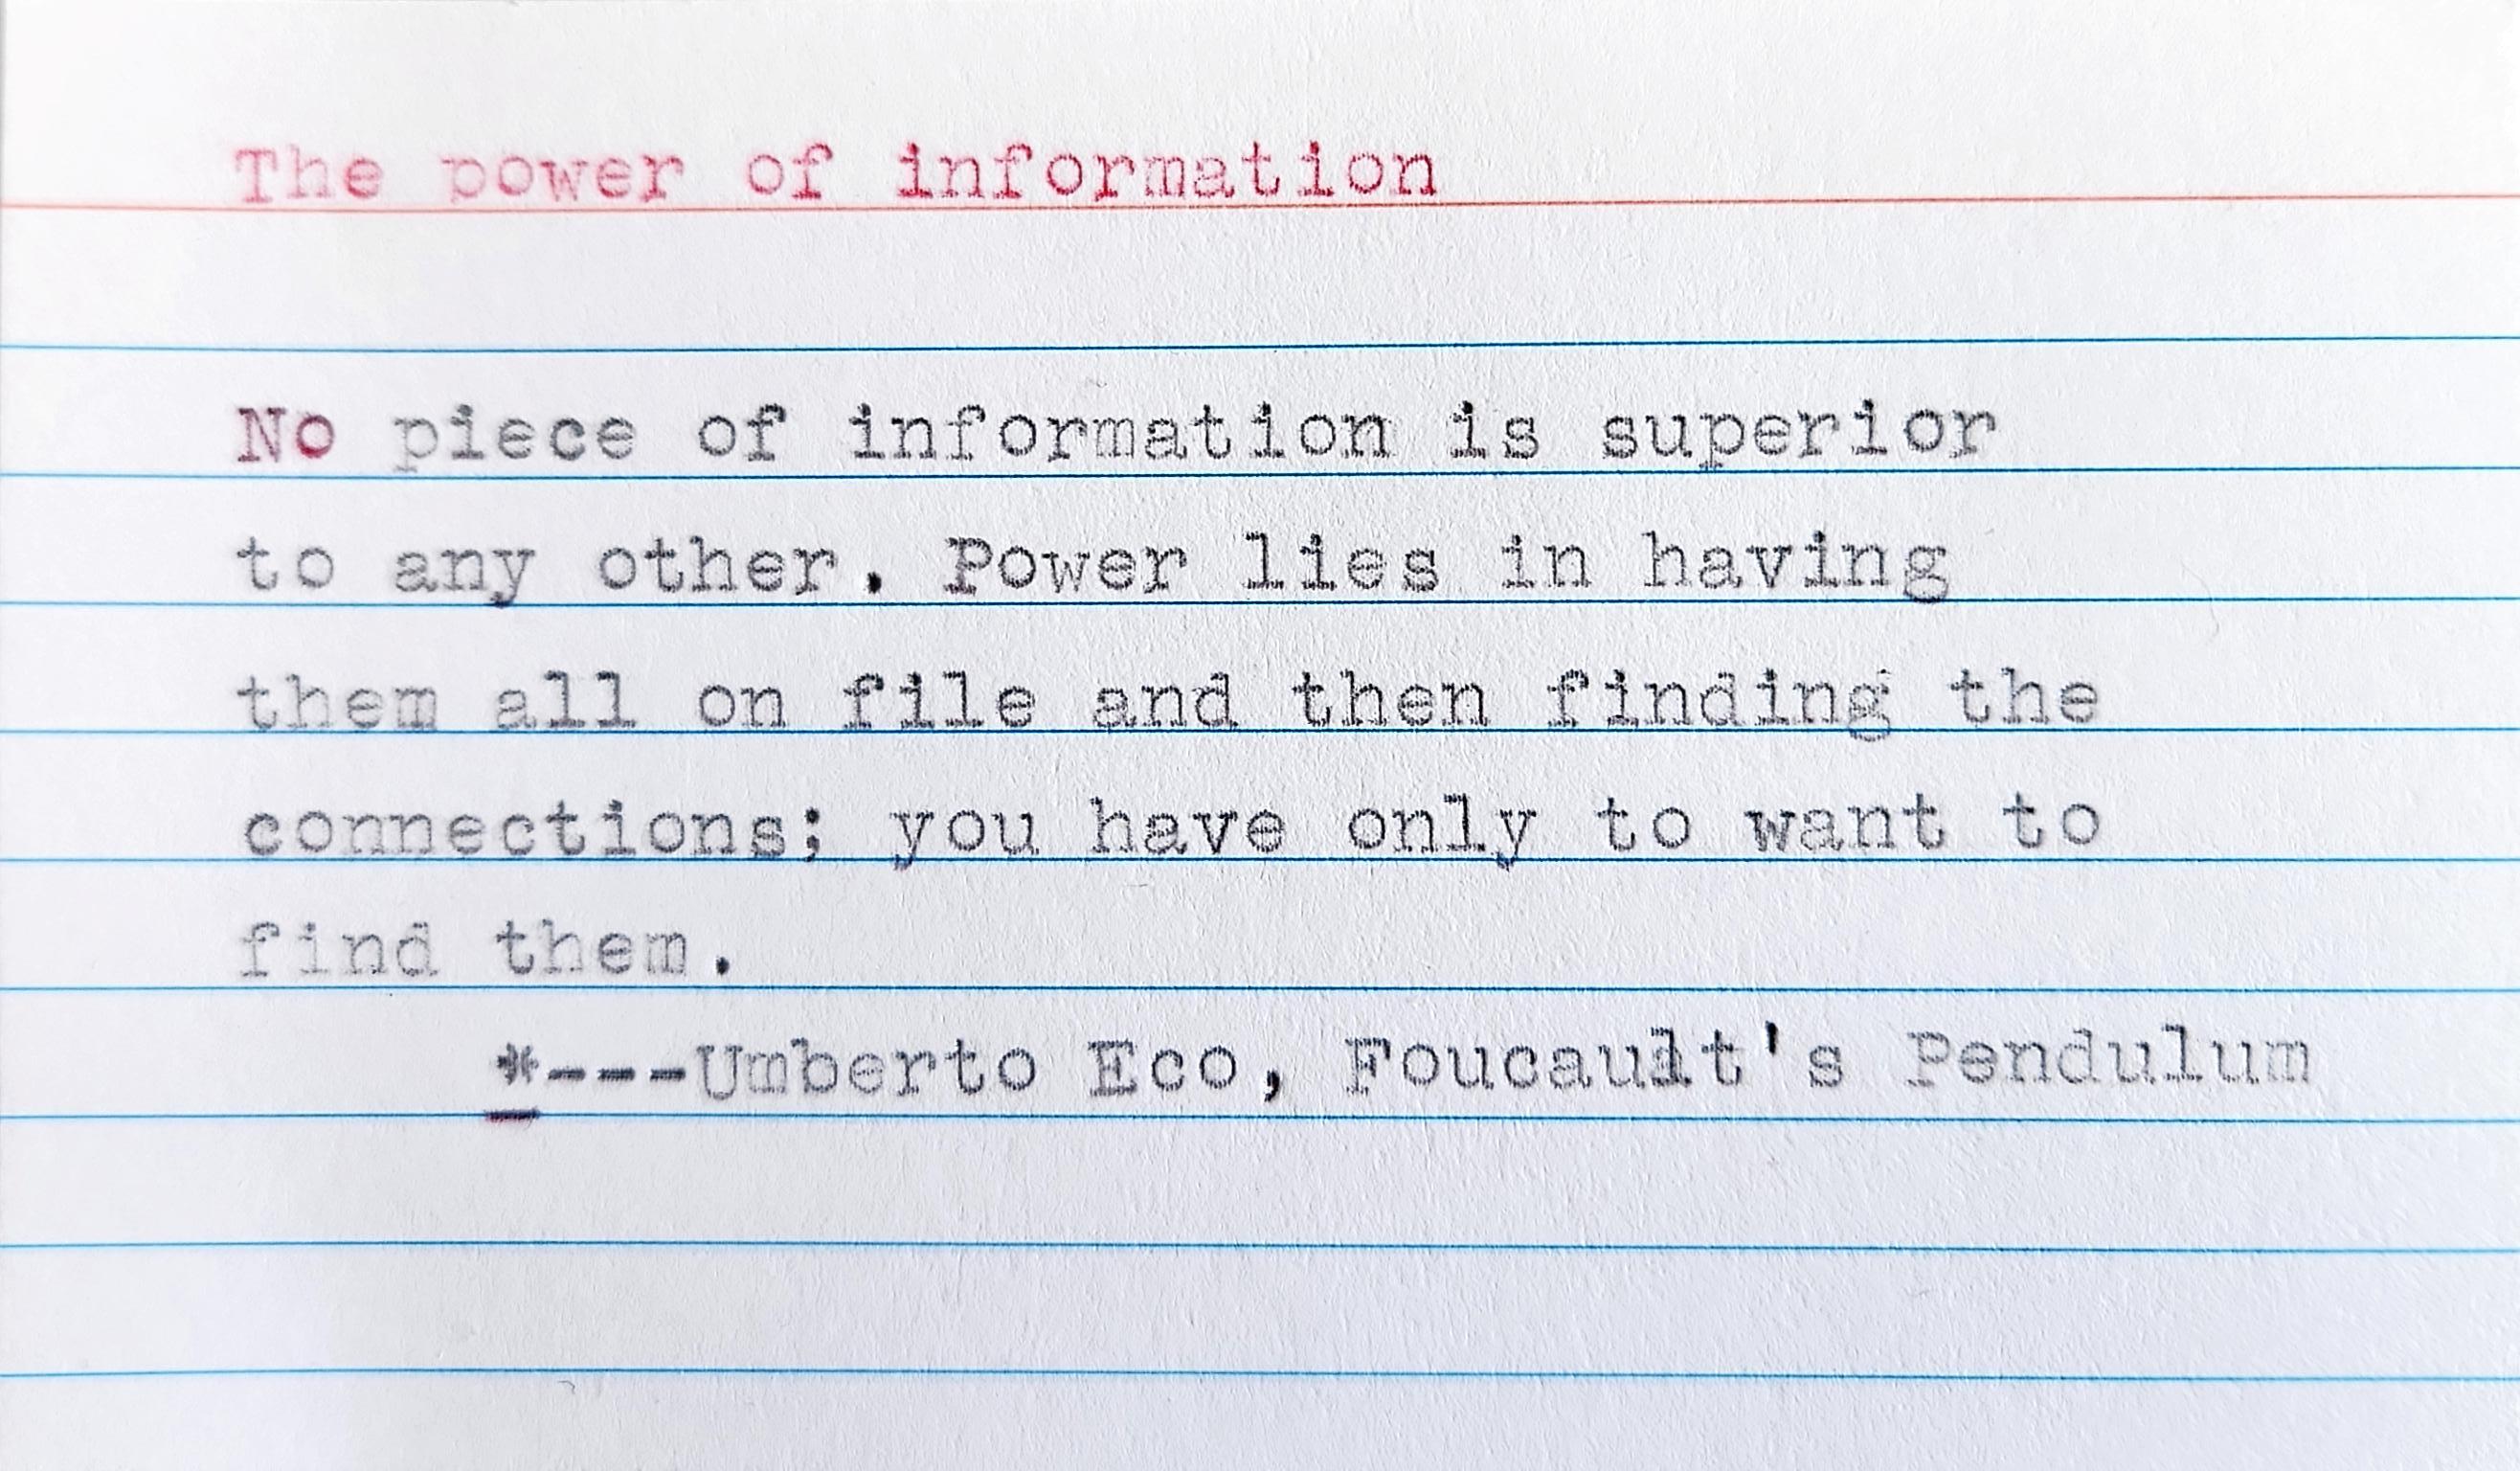 Typed 3 x 5 inch index card. The top title in red ink reads "The Power of Information" with the following quotation: 
No piece of information is superior to any other. Power lies in having them all on file and then finding the connections. There are always connections; you have only to want to find them. --- Umberto Eco, Foucault's Pendulum 